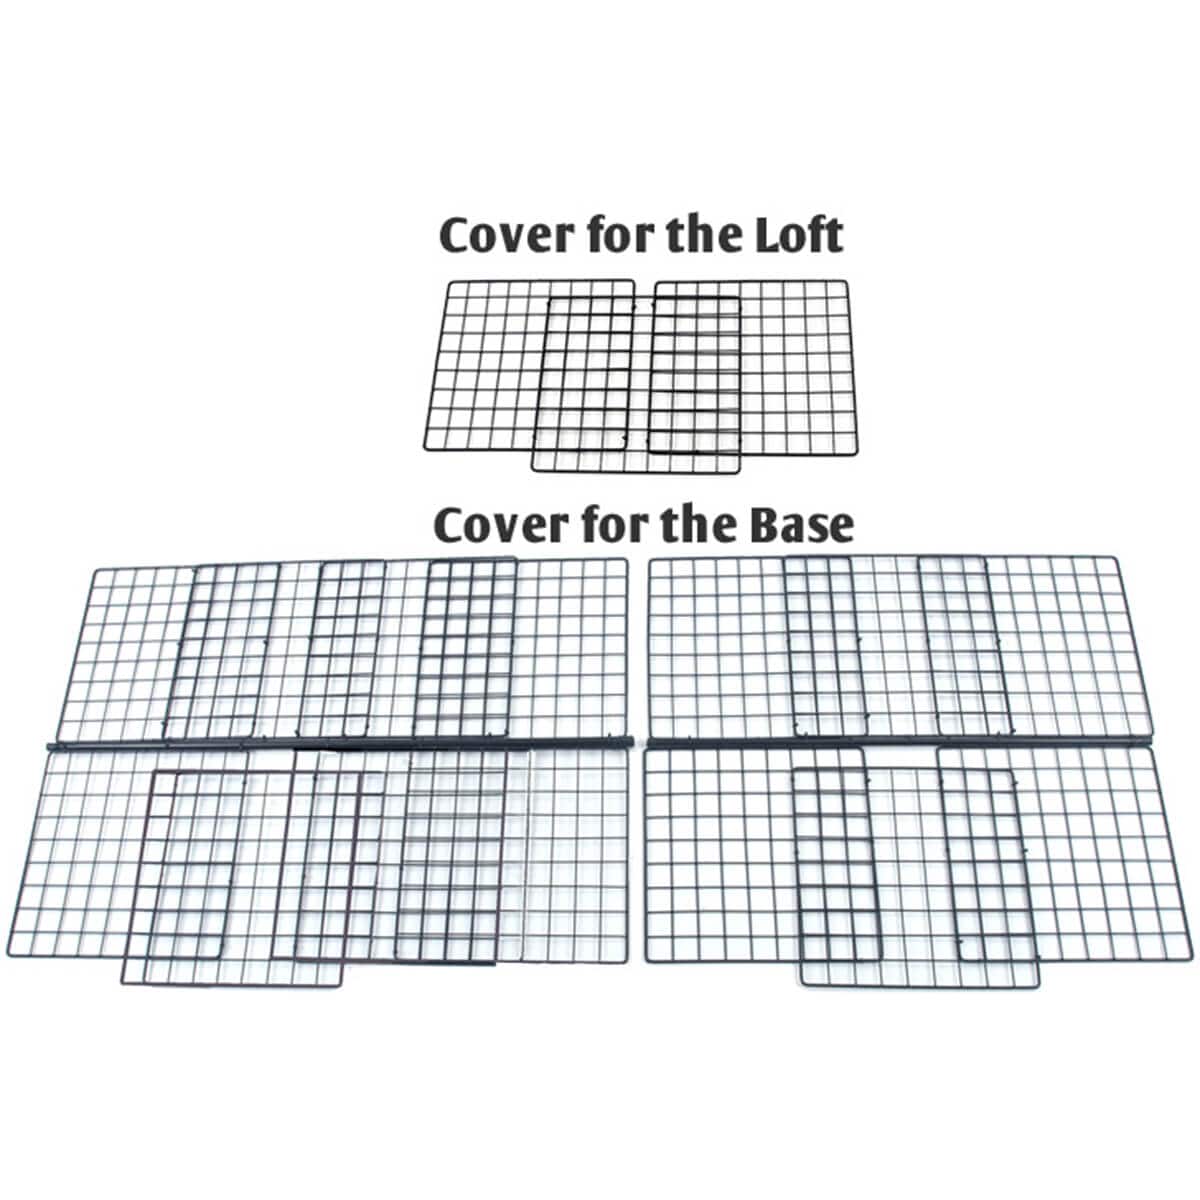 How to lay your grids out for a Jumbo/narrow covered C&C guinea pig cage